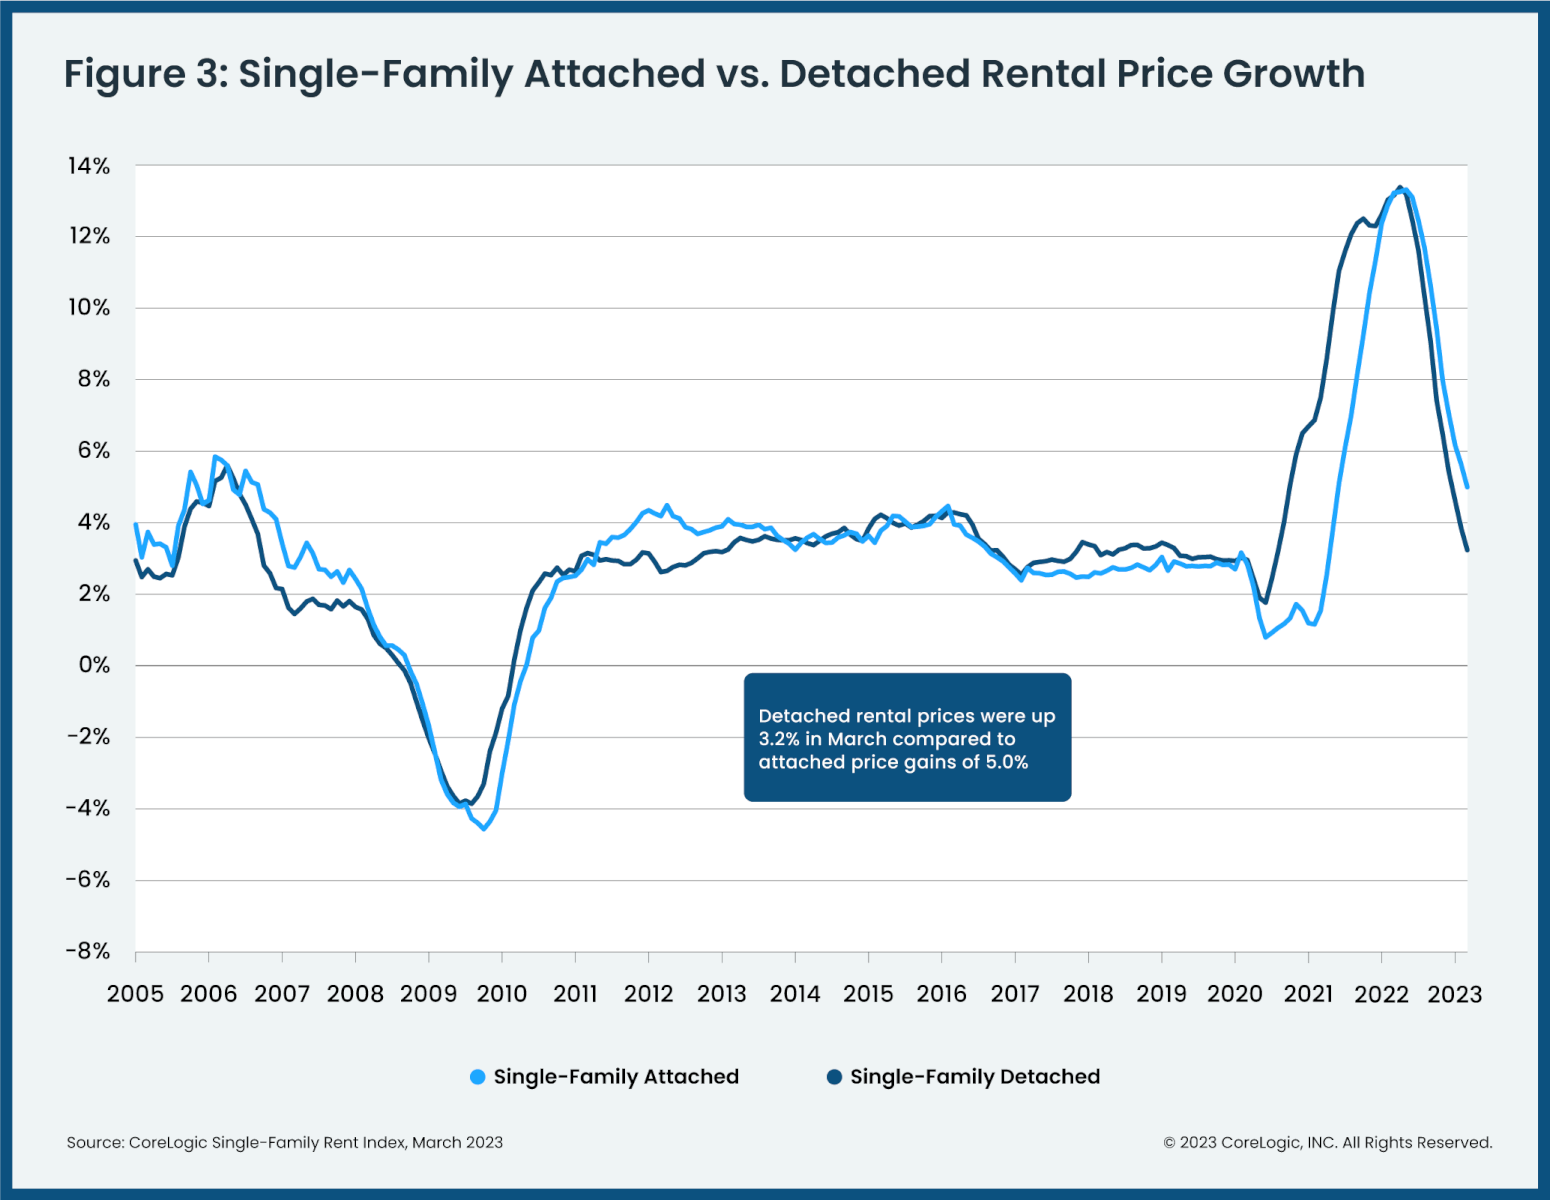 March 2023 historical attached versus detached rental cost growth